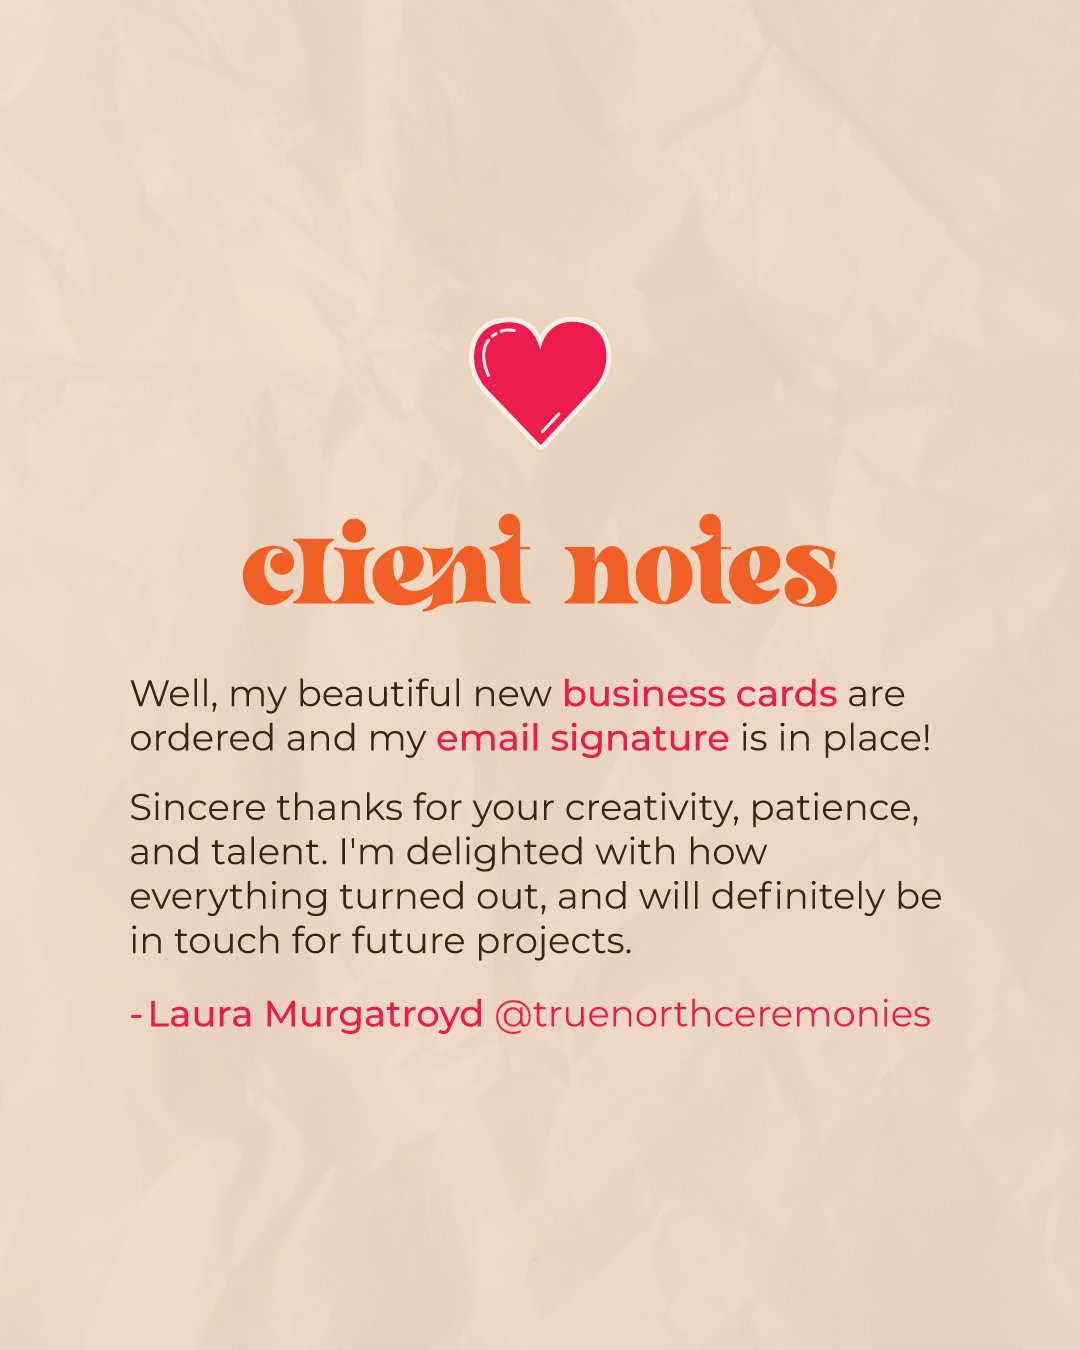 Client notes 💖
.
Huge thank you to Laura for the lovely testimonial, I deeply appreciate it! If you want to check out her business cards, check out my post from a couple of weeks ago! 👀
.
I love working with all clients, but clients that are near m